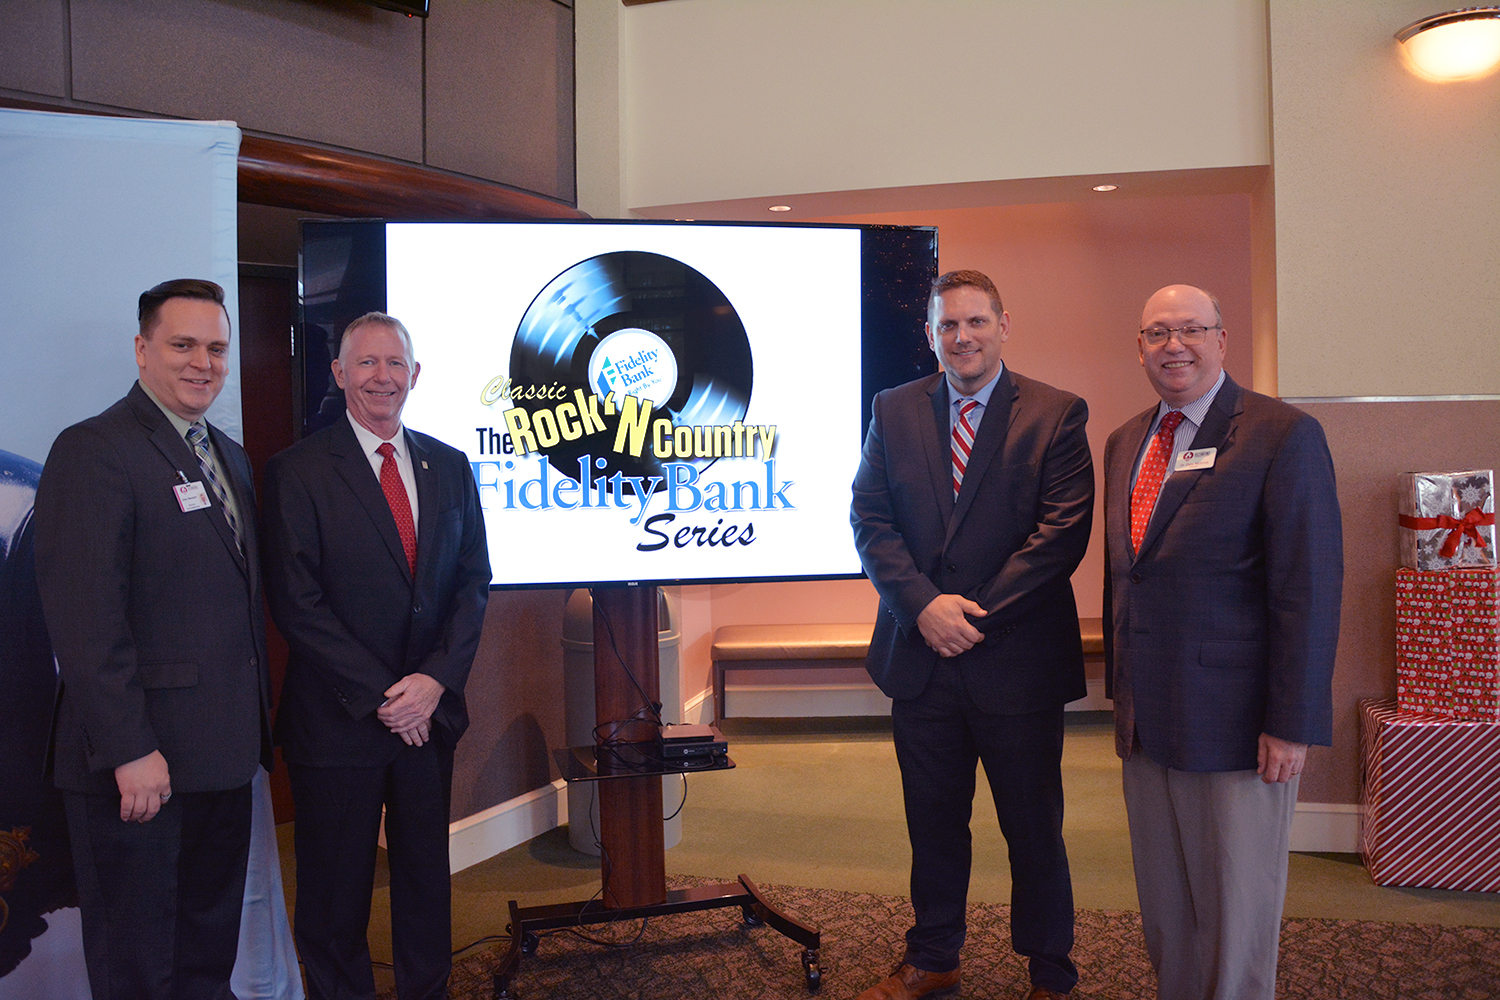 Fidelity Bank executives and RichmondCC leaders stand together with the Classic Rock'N Country concert series logo.